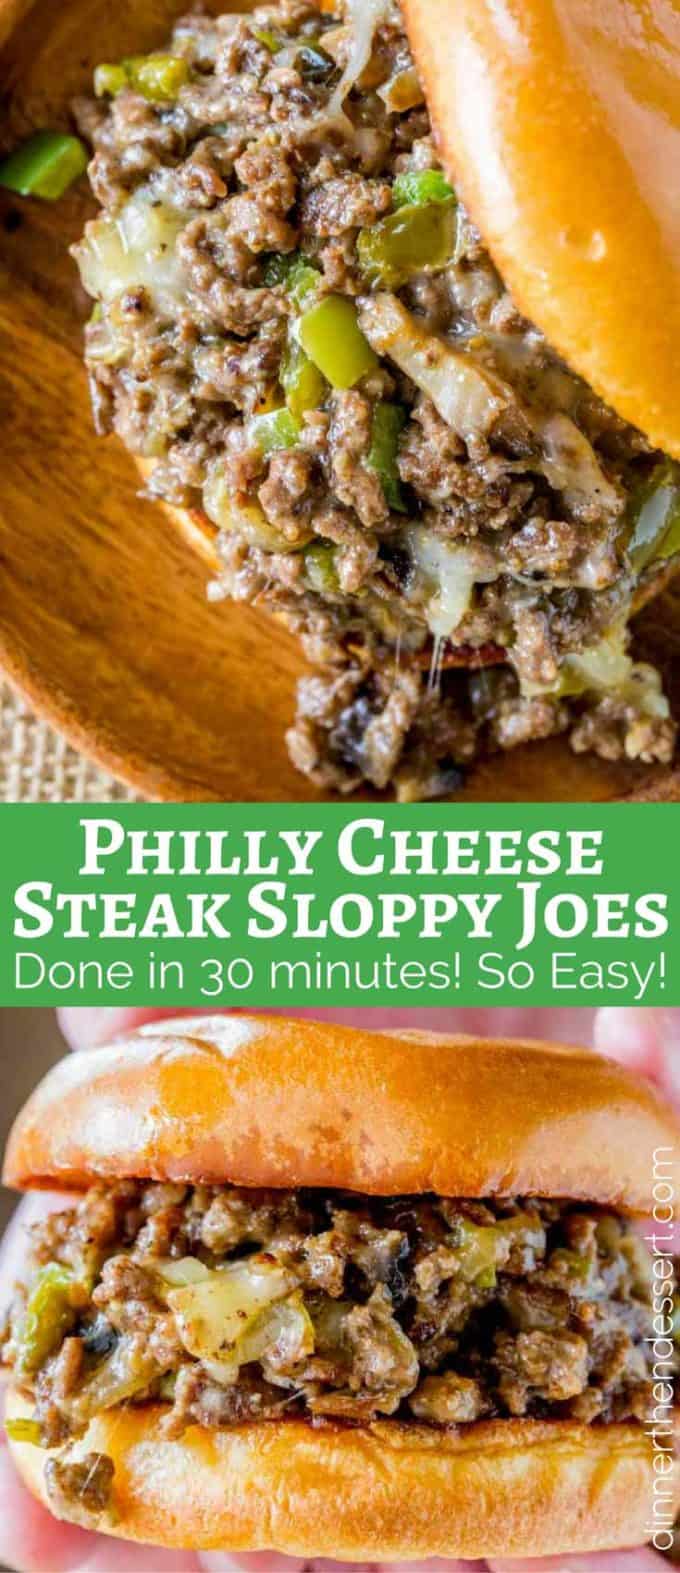 We make these Philly Cheese Steak Sloppy Joes ALL THE TIME!